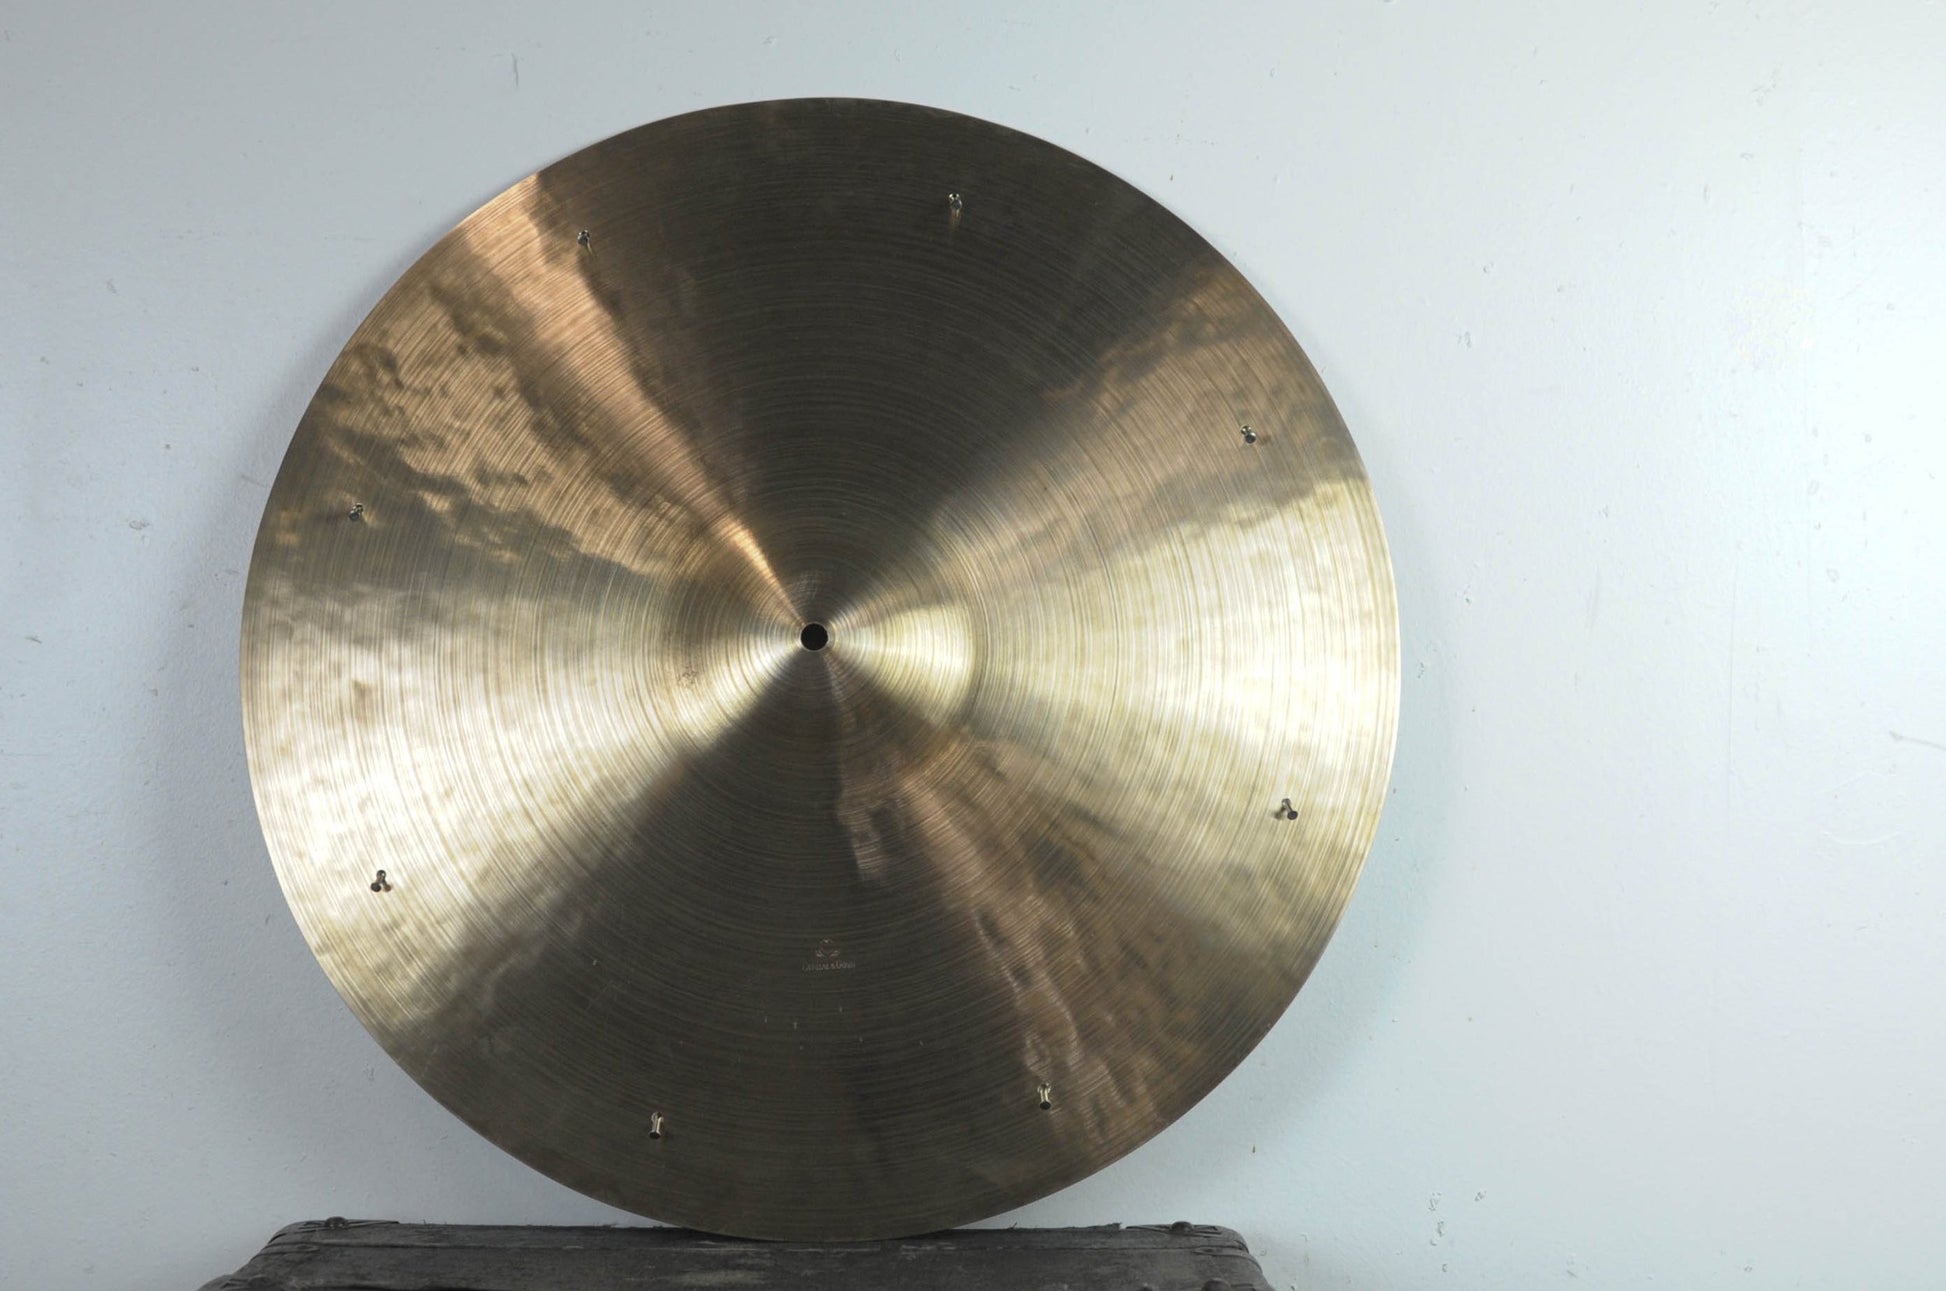 Cymbal and Gong 22" 11th Anniversary Ride Cymbal 2316g